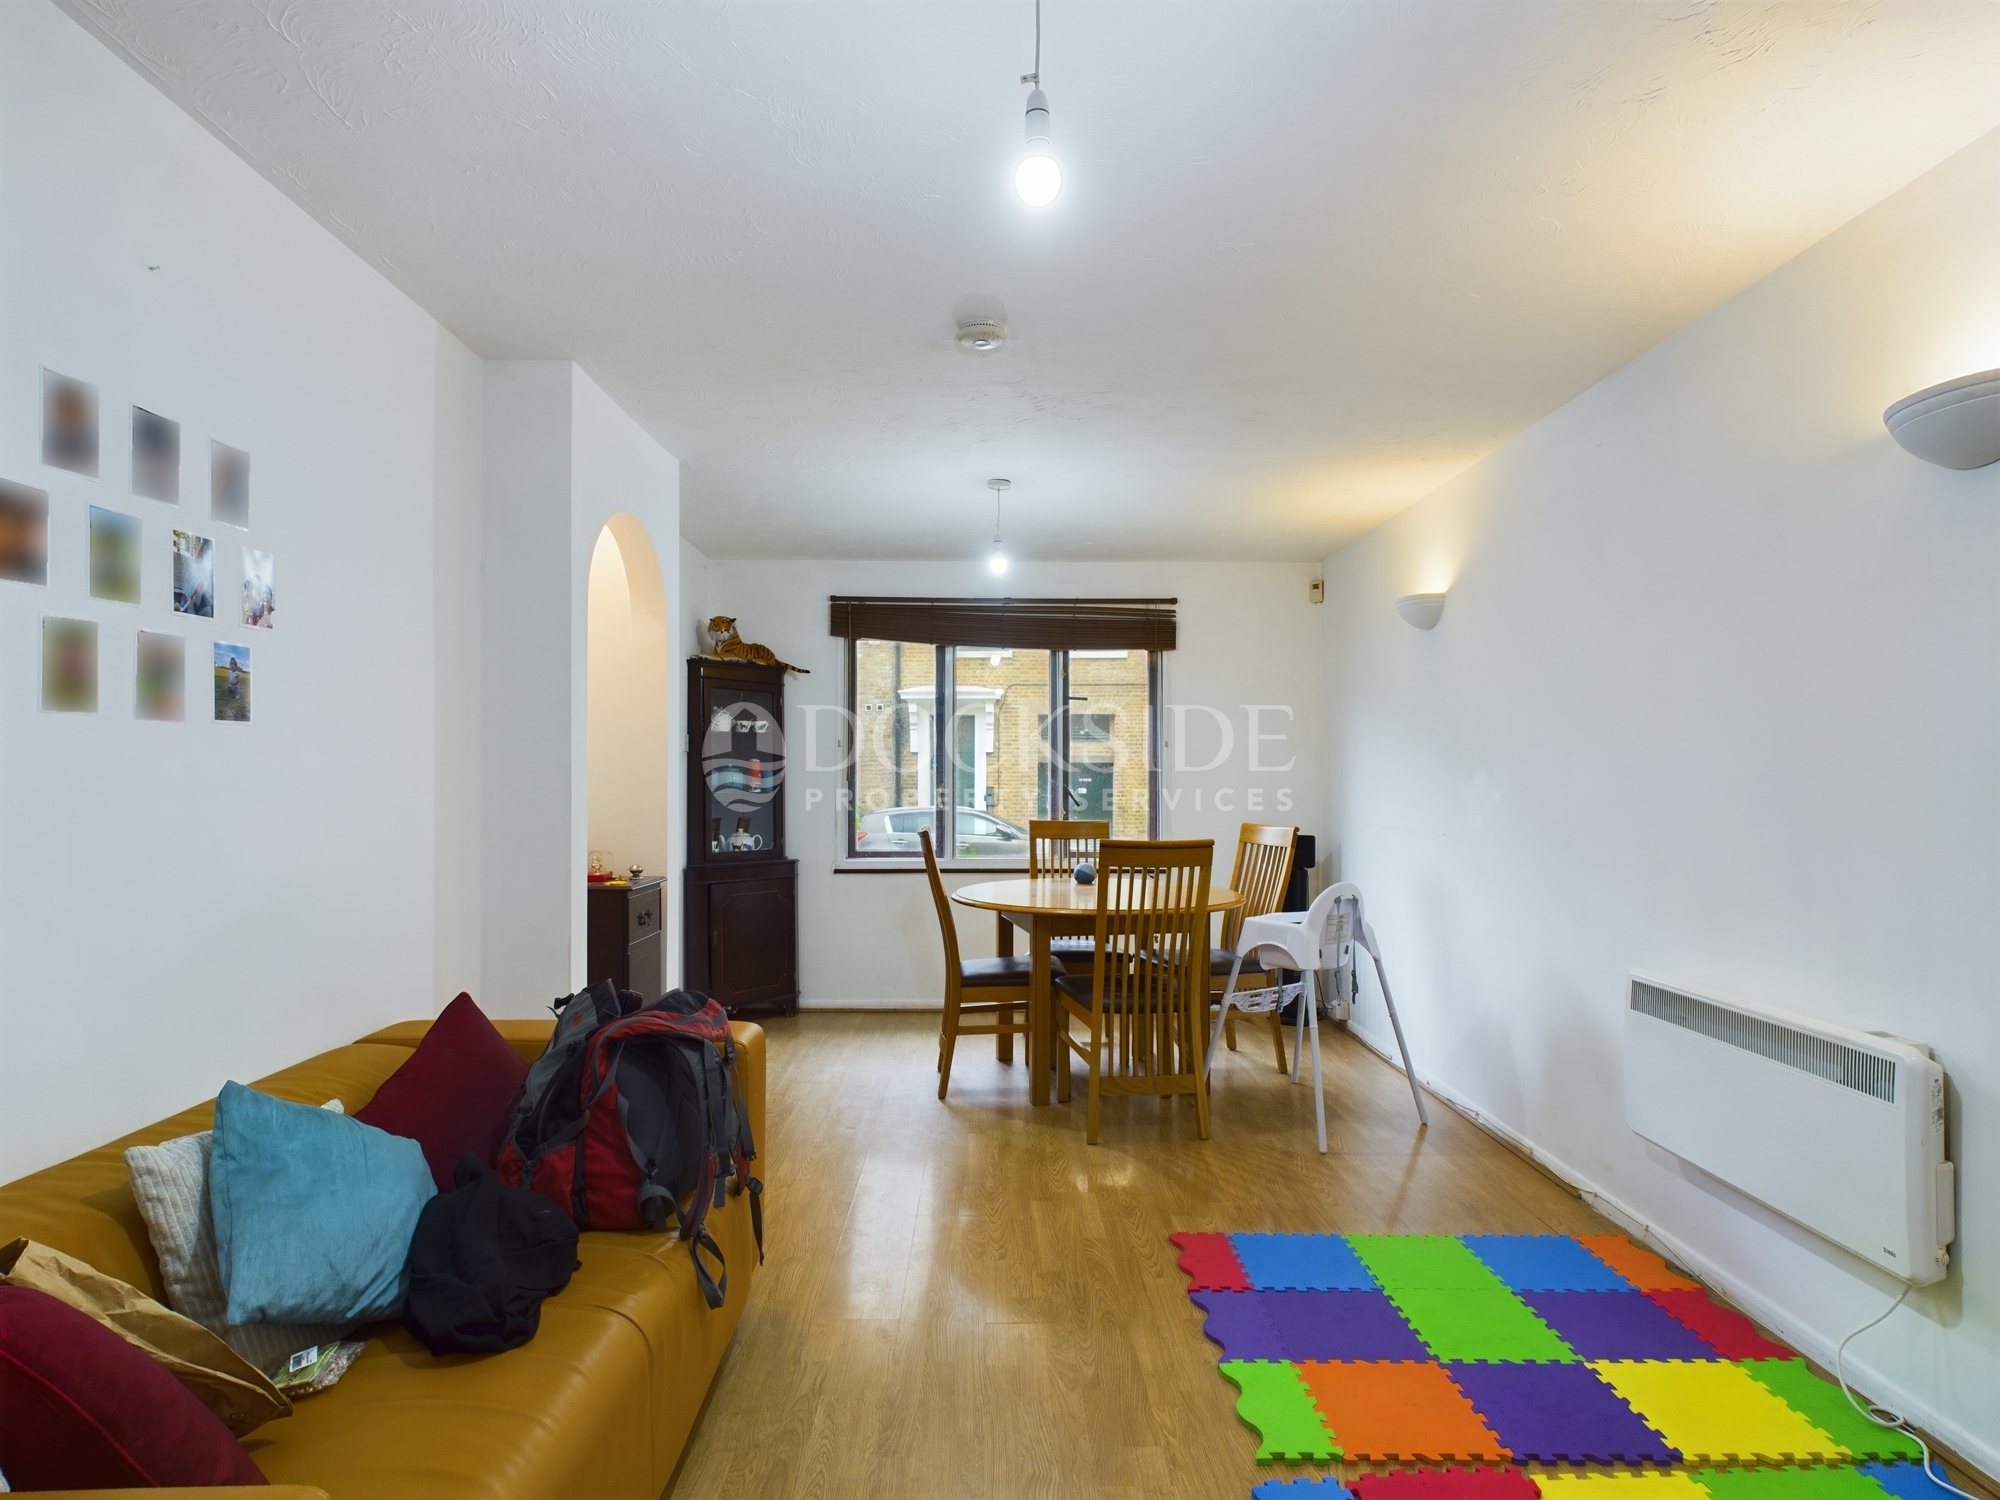 2 bed flat to rent in Tyndale Court, London, E14 